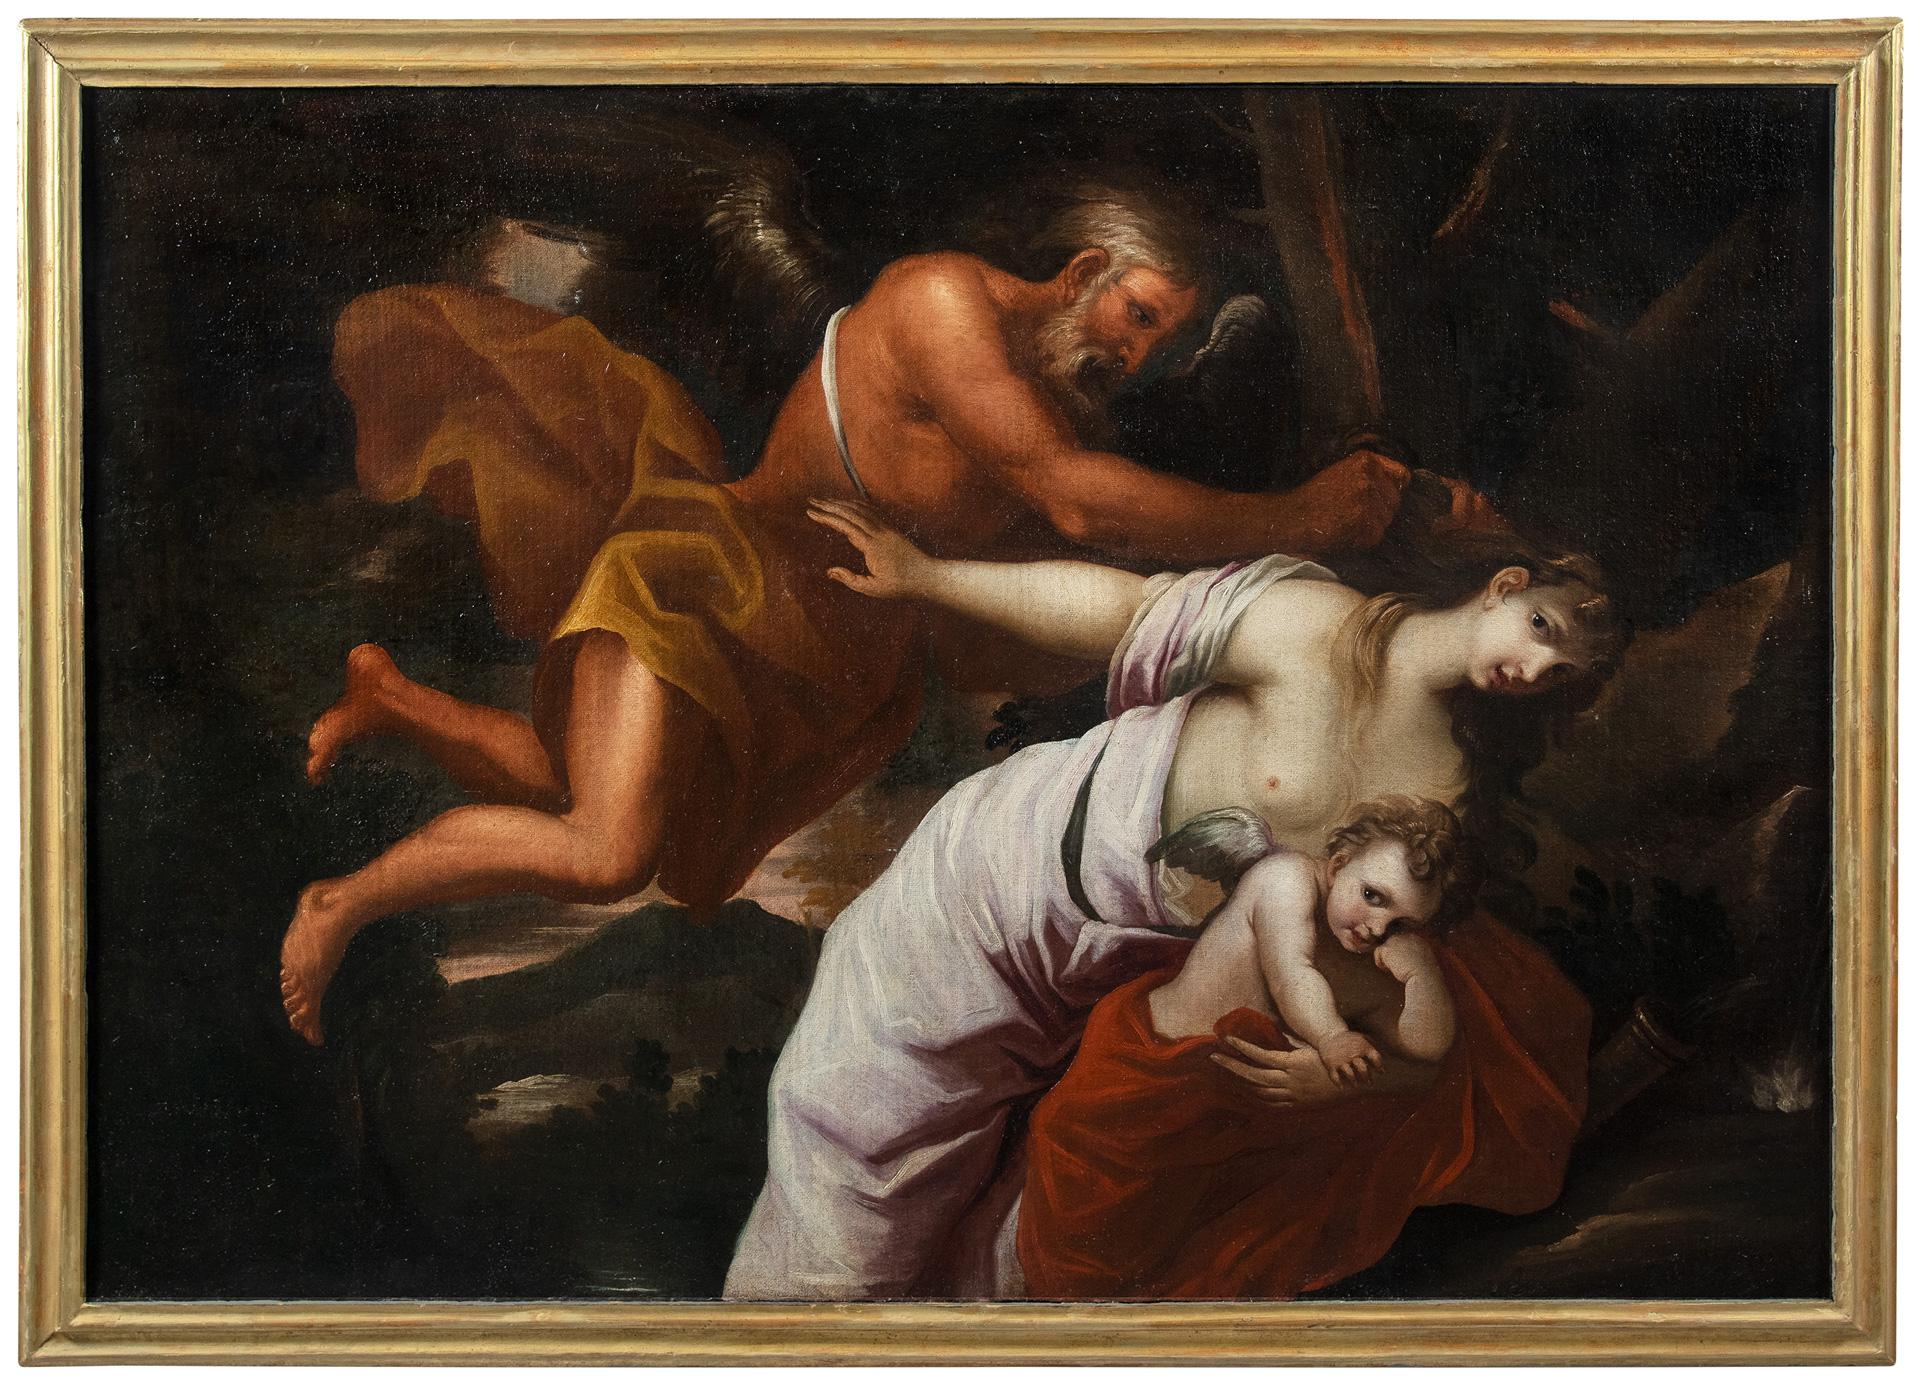 Pietro Ricchi, known as Lucchese (Lucca 1606 - Udine 1675) attr. a - Venus protects Love from Time.

92 x 132 cm without frame, 101 x 141 cm with frame.

Oil on canvas, in a gilded wooden frame.

Condition report: Painting subjected to relining.